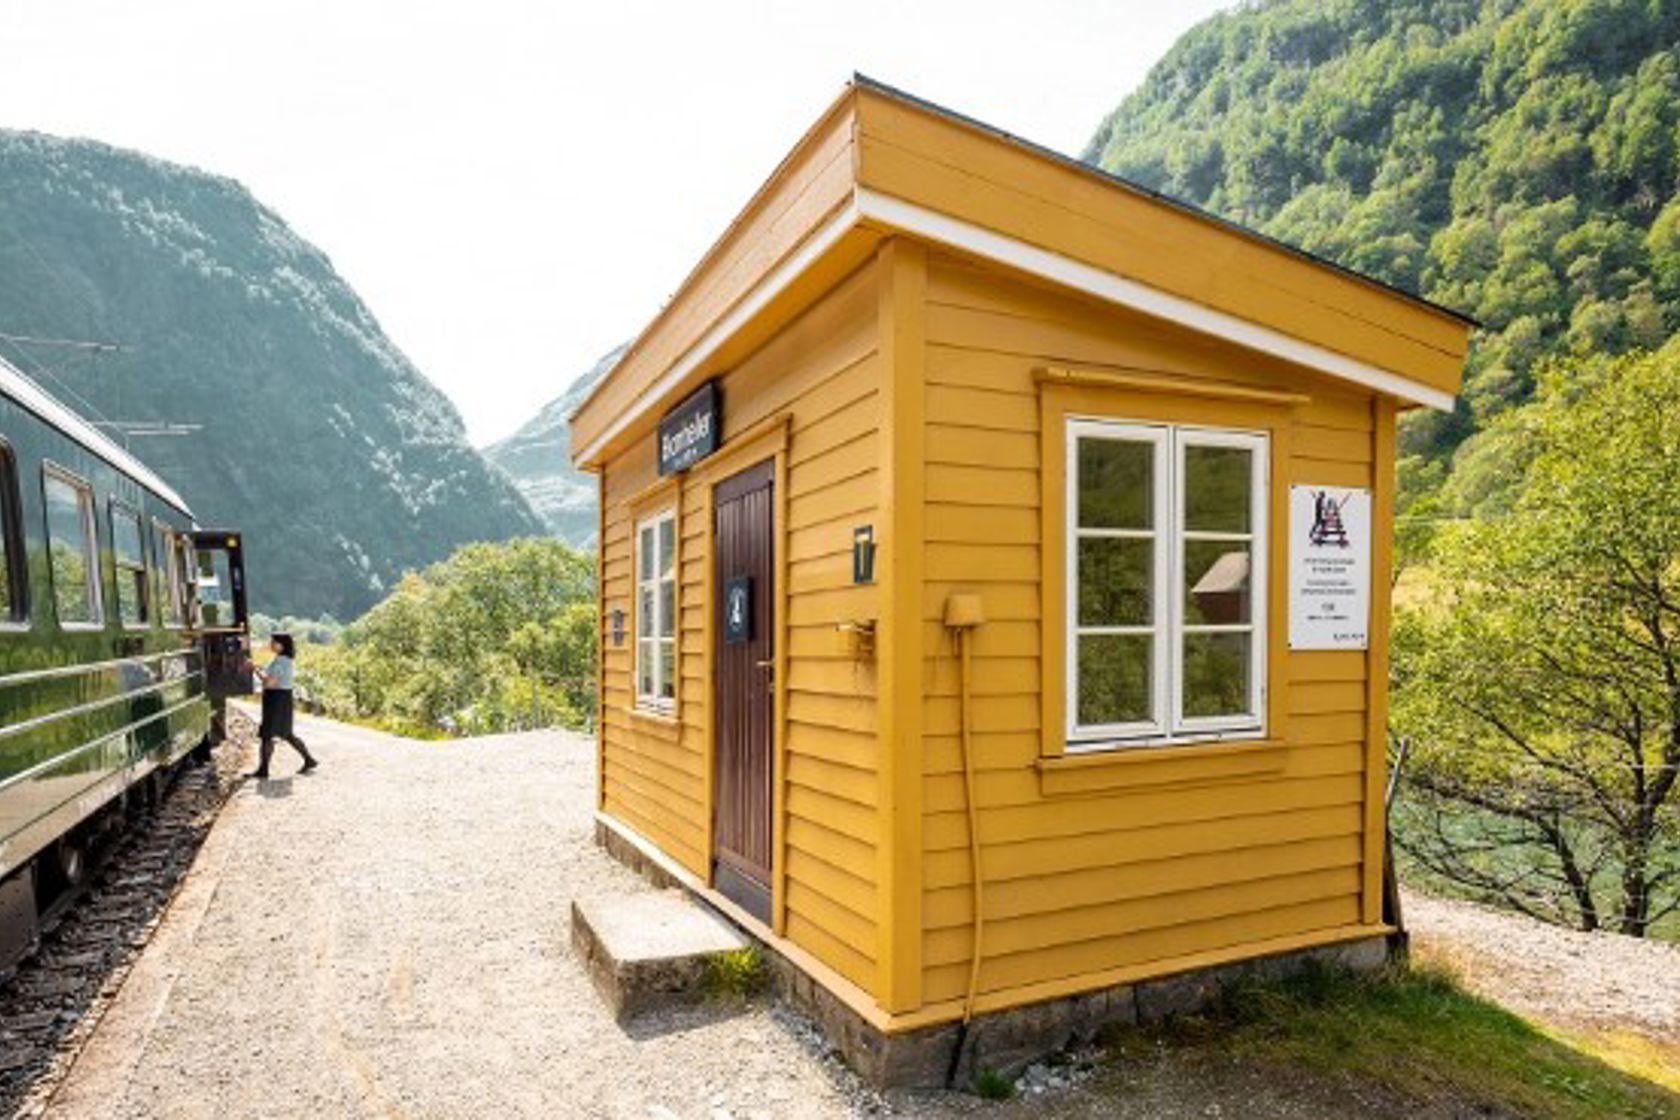 Exterior view of Blomheller stop, a yellow shed